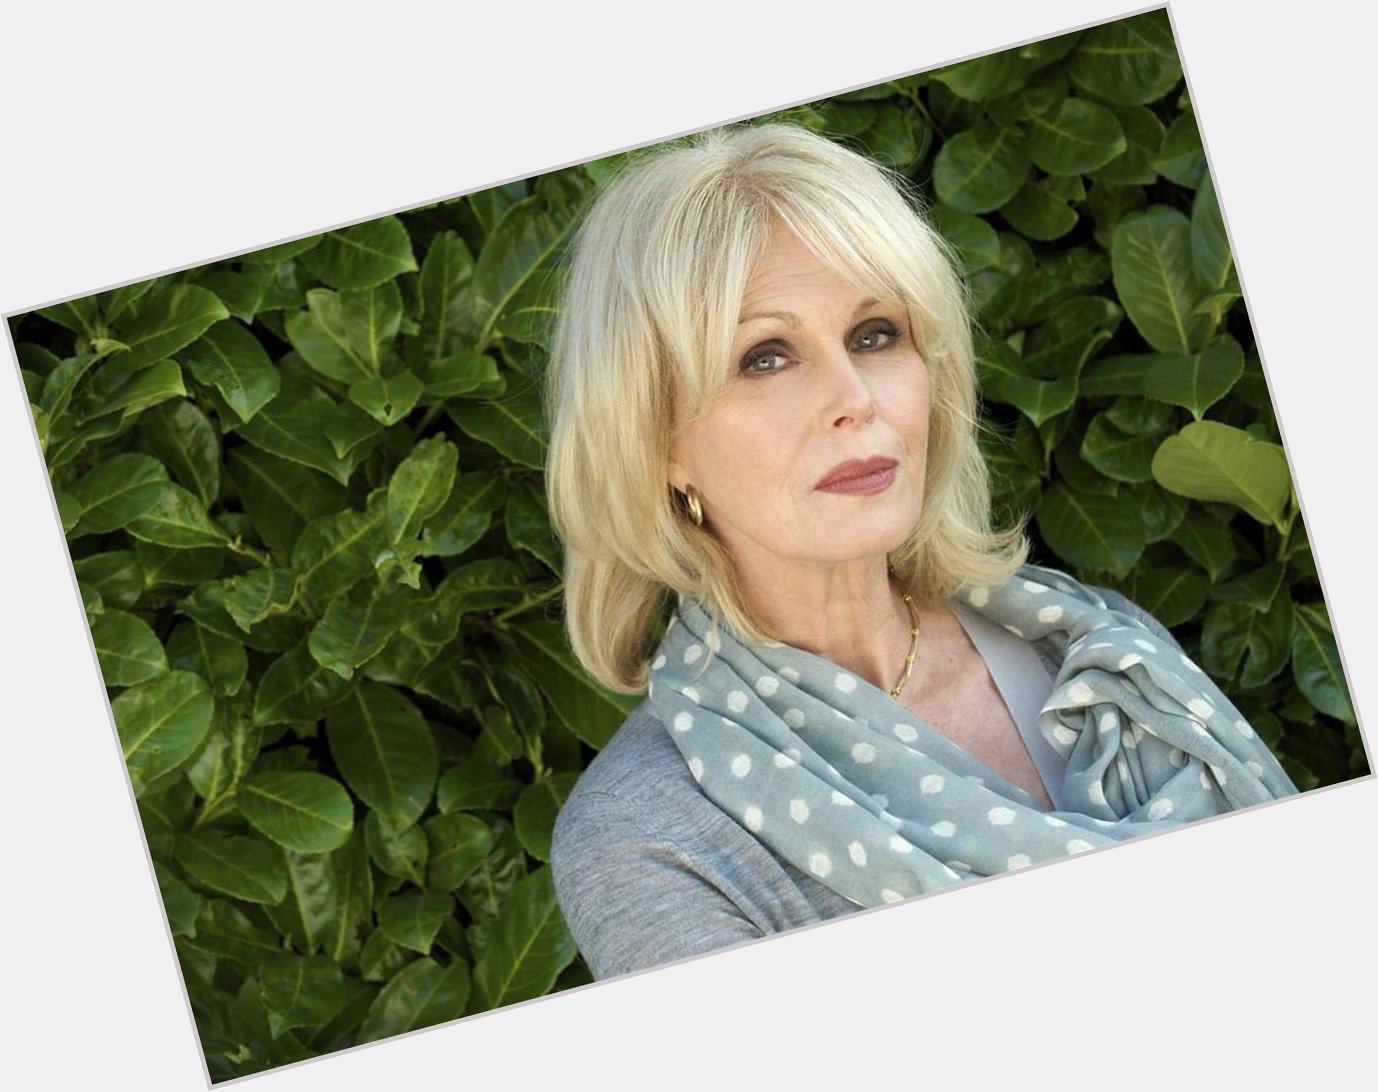 Happy Birthday to \AbFab\\s gorgeous Joanna Lumley! So thrilled a movie is happening! Long live Patsy and Edina! 